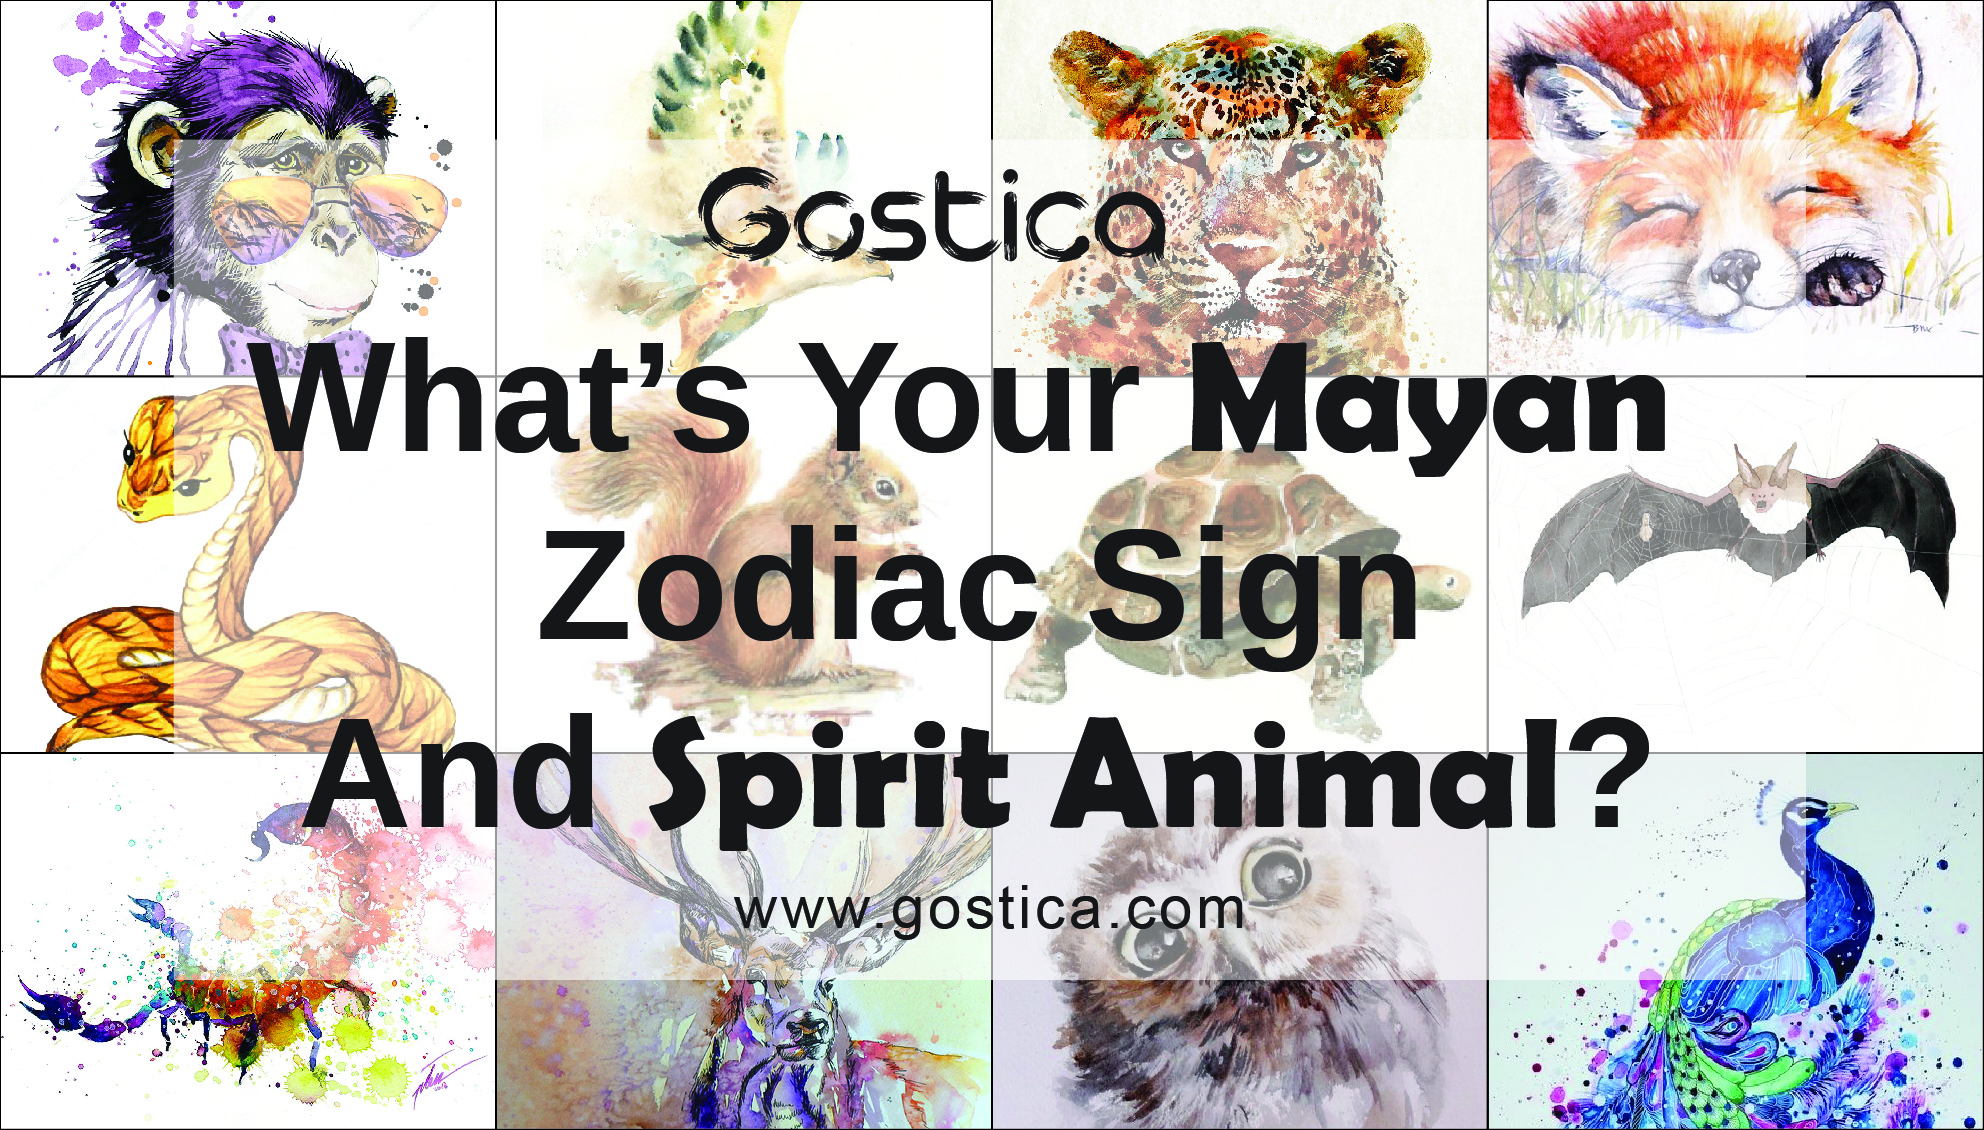 What's Your Mayan Zodiac Sign And Spirit Animal?